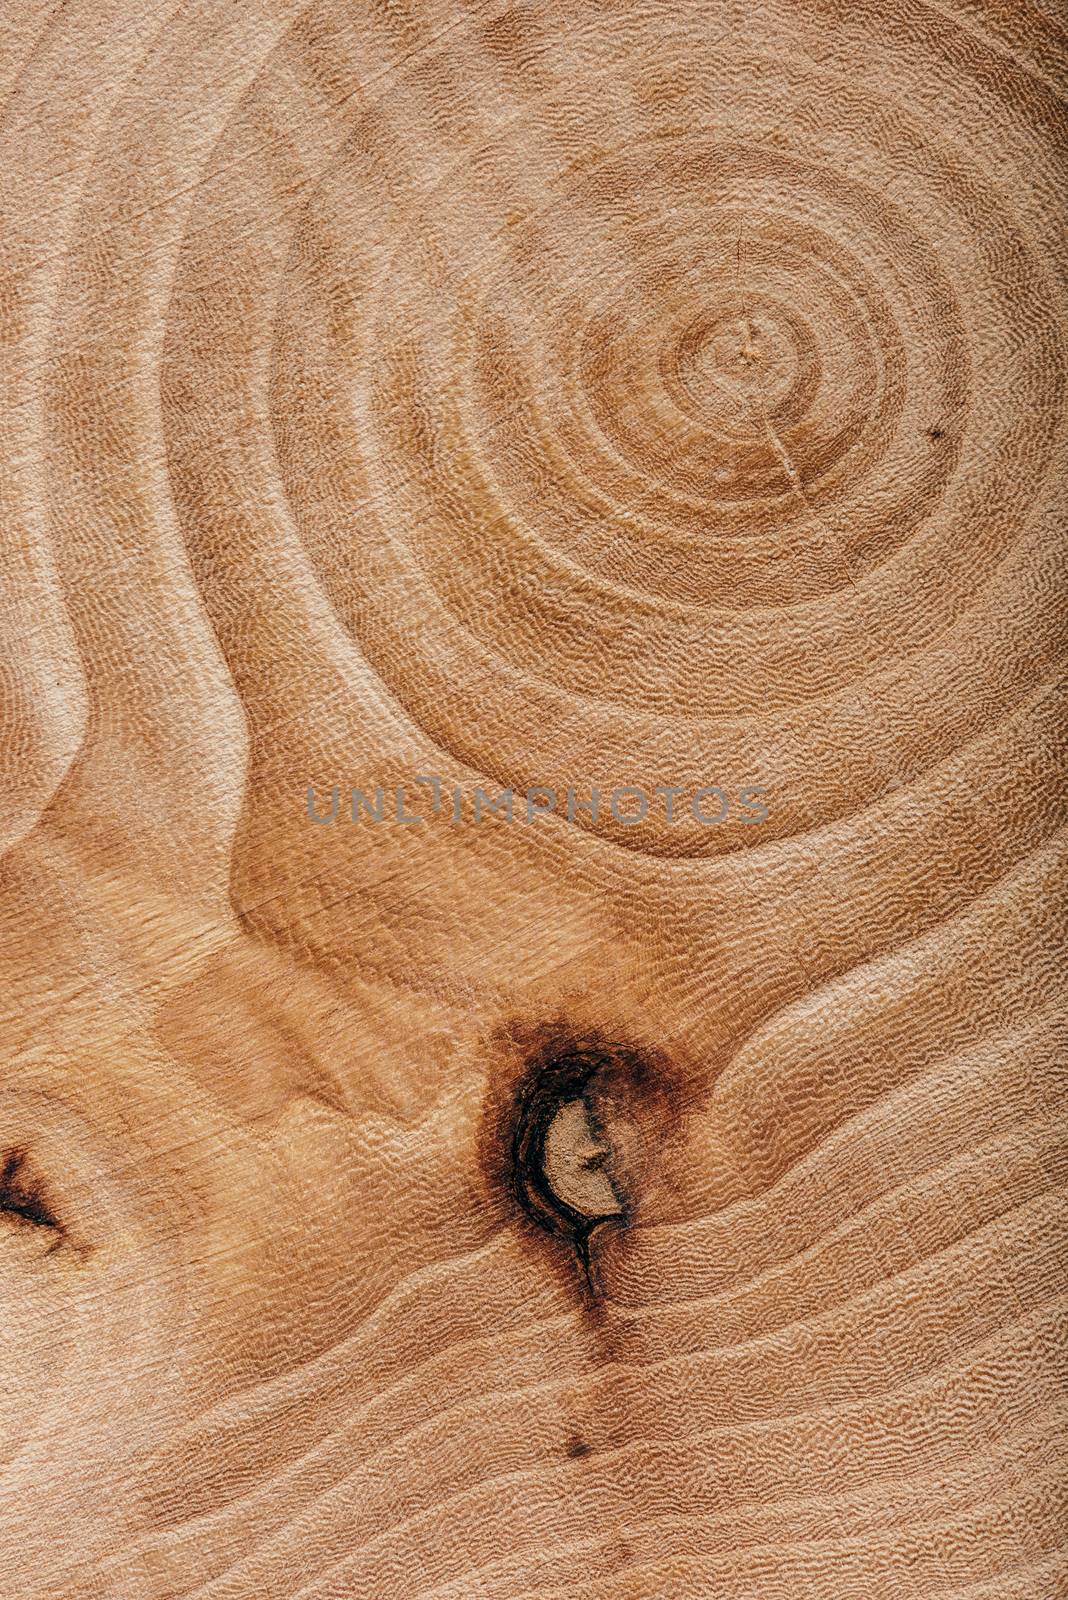 Ash wood slab texture with annual rings. by Seva_blsv